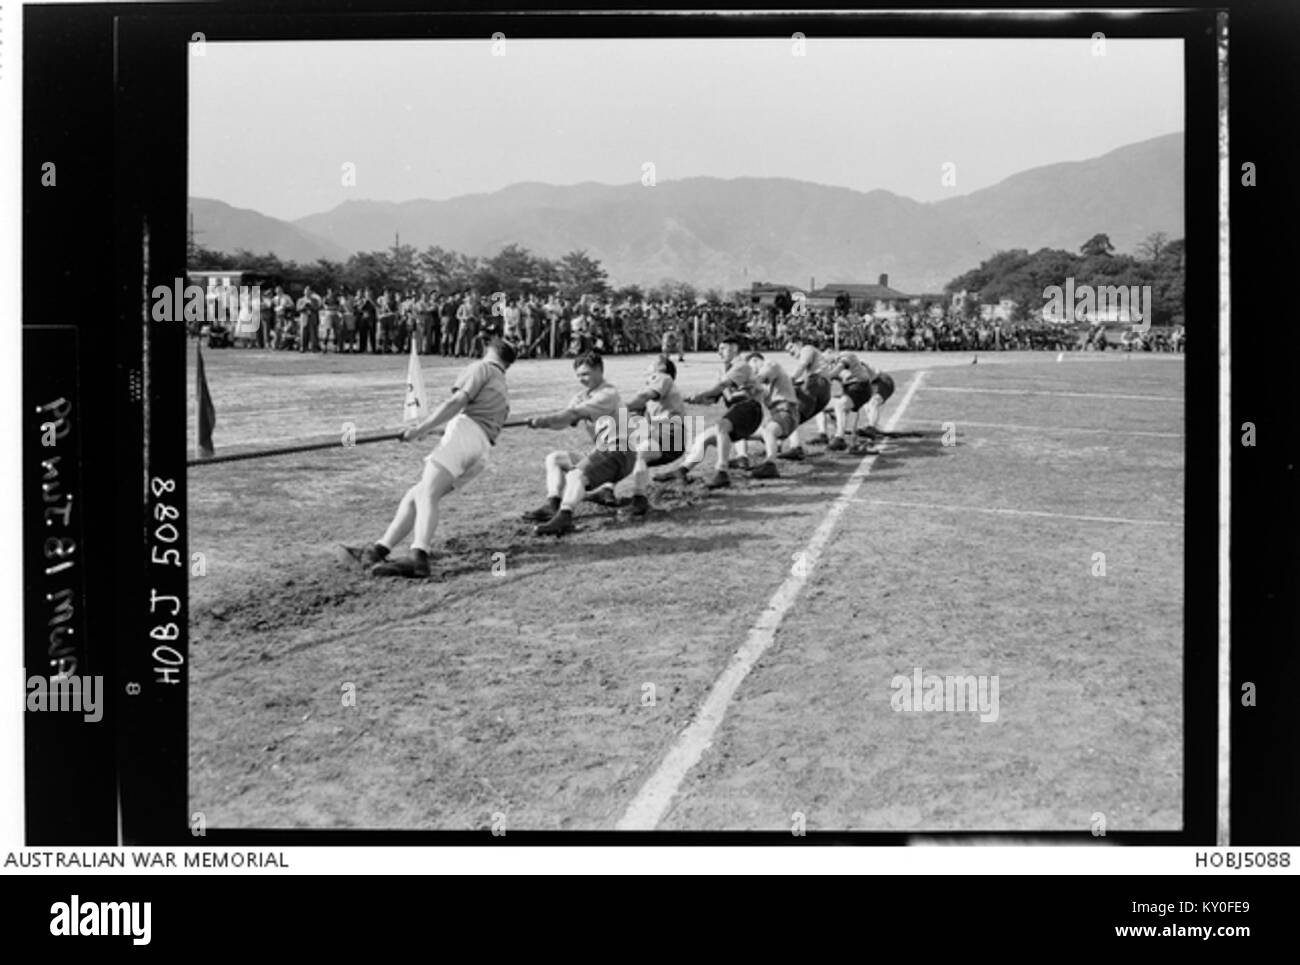 HOBJ5088 The Anzac tug of war team pulling during the British Commonwealth Forces Korea (BCFK) Annual Athletic Meeting Stock Photo